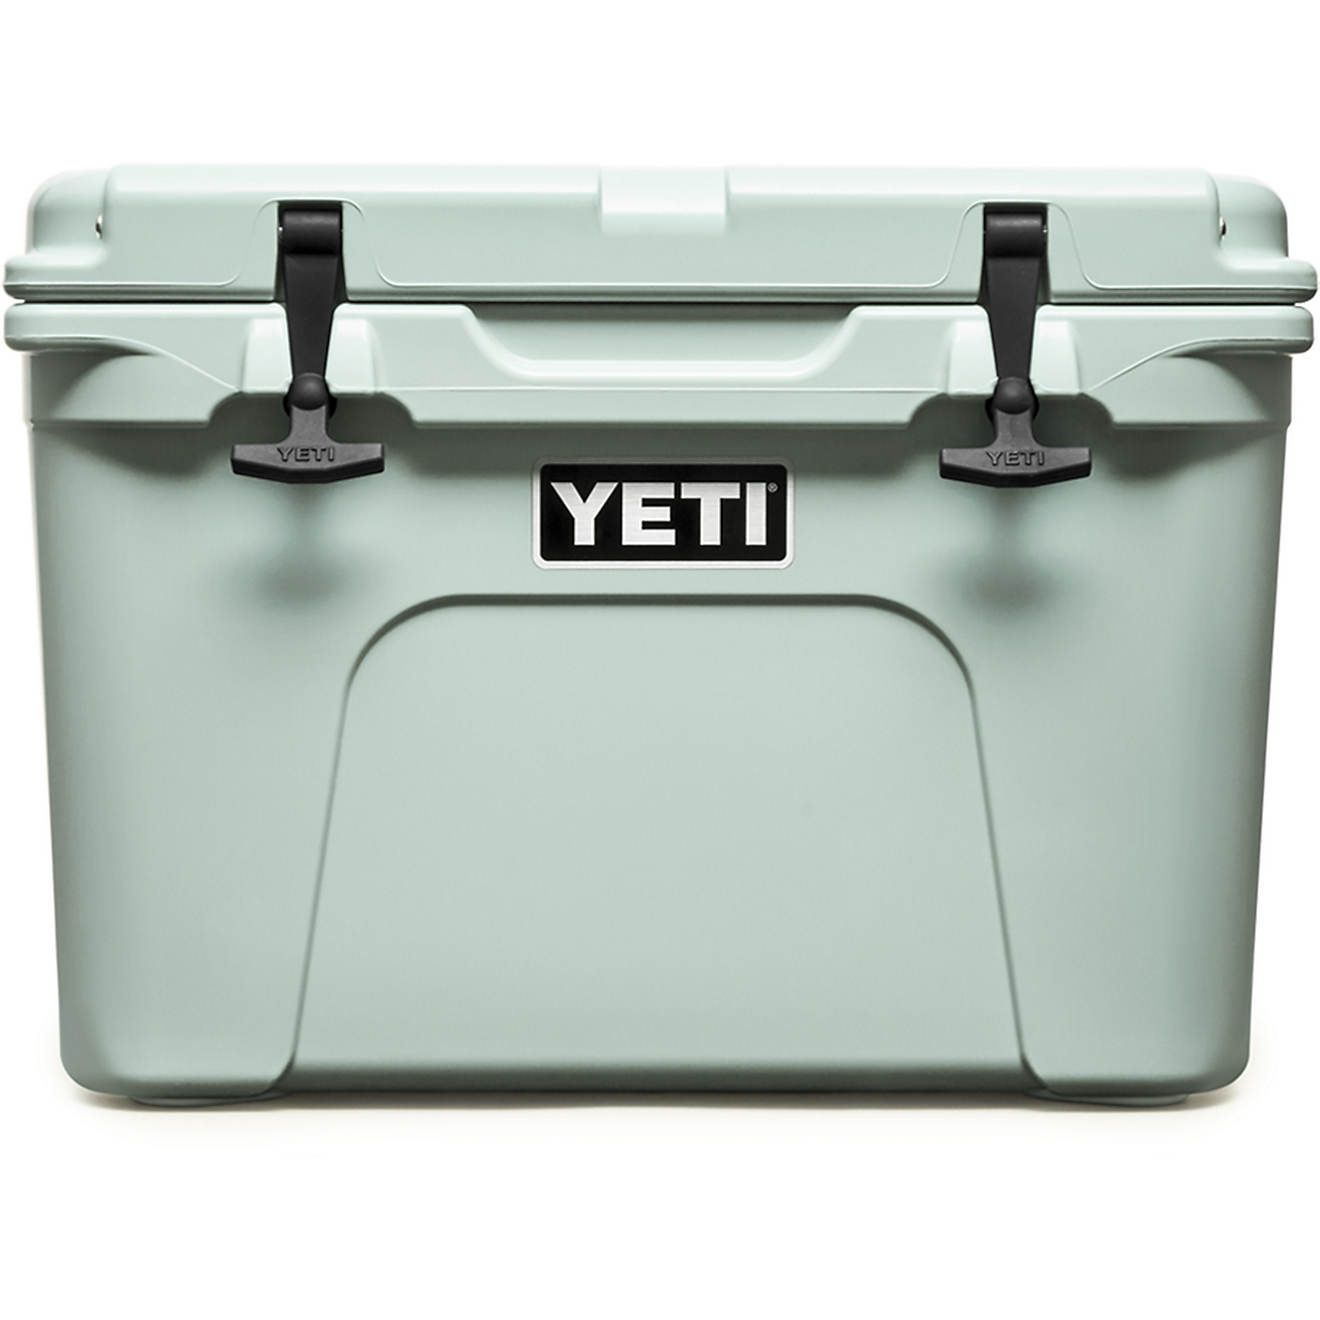 YETI Tundra 35 Cooler | Academy Sports + Outdoor Affiliate